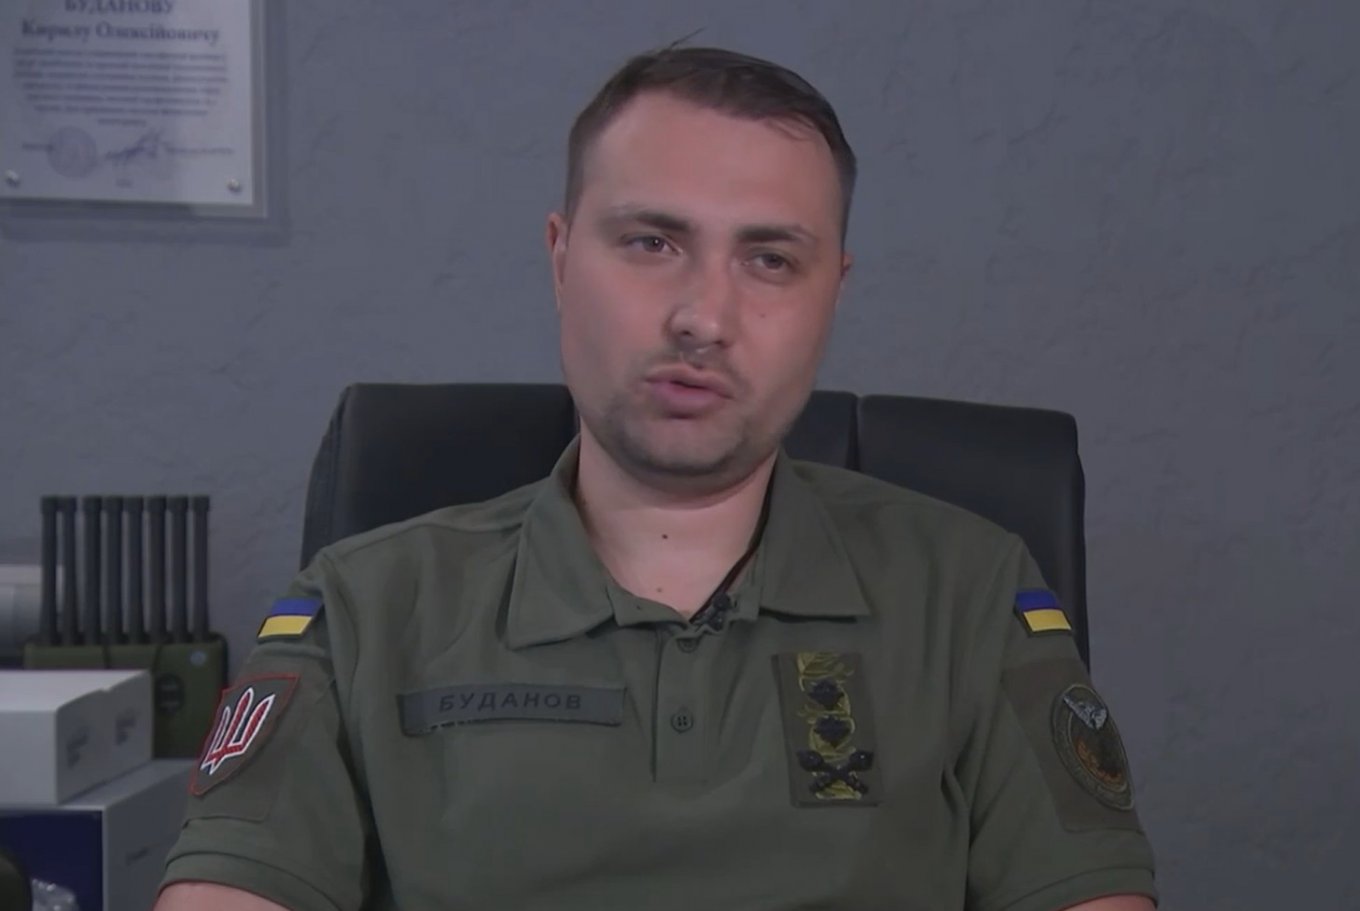 Chief of the Defense Intelligence of the Ministry of Defense of Ukraine Kyrylo Budanov, Intelligences Say russian-Ukrainian War Going Through Turning Point While Russia in Very Fragile Position, Defense Express